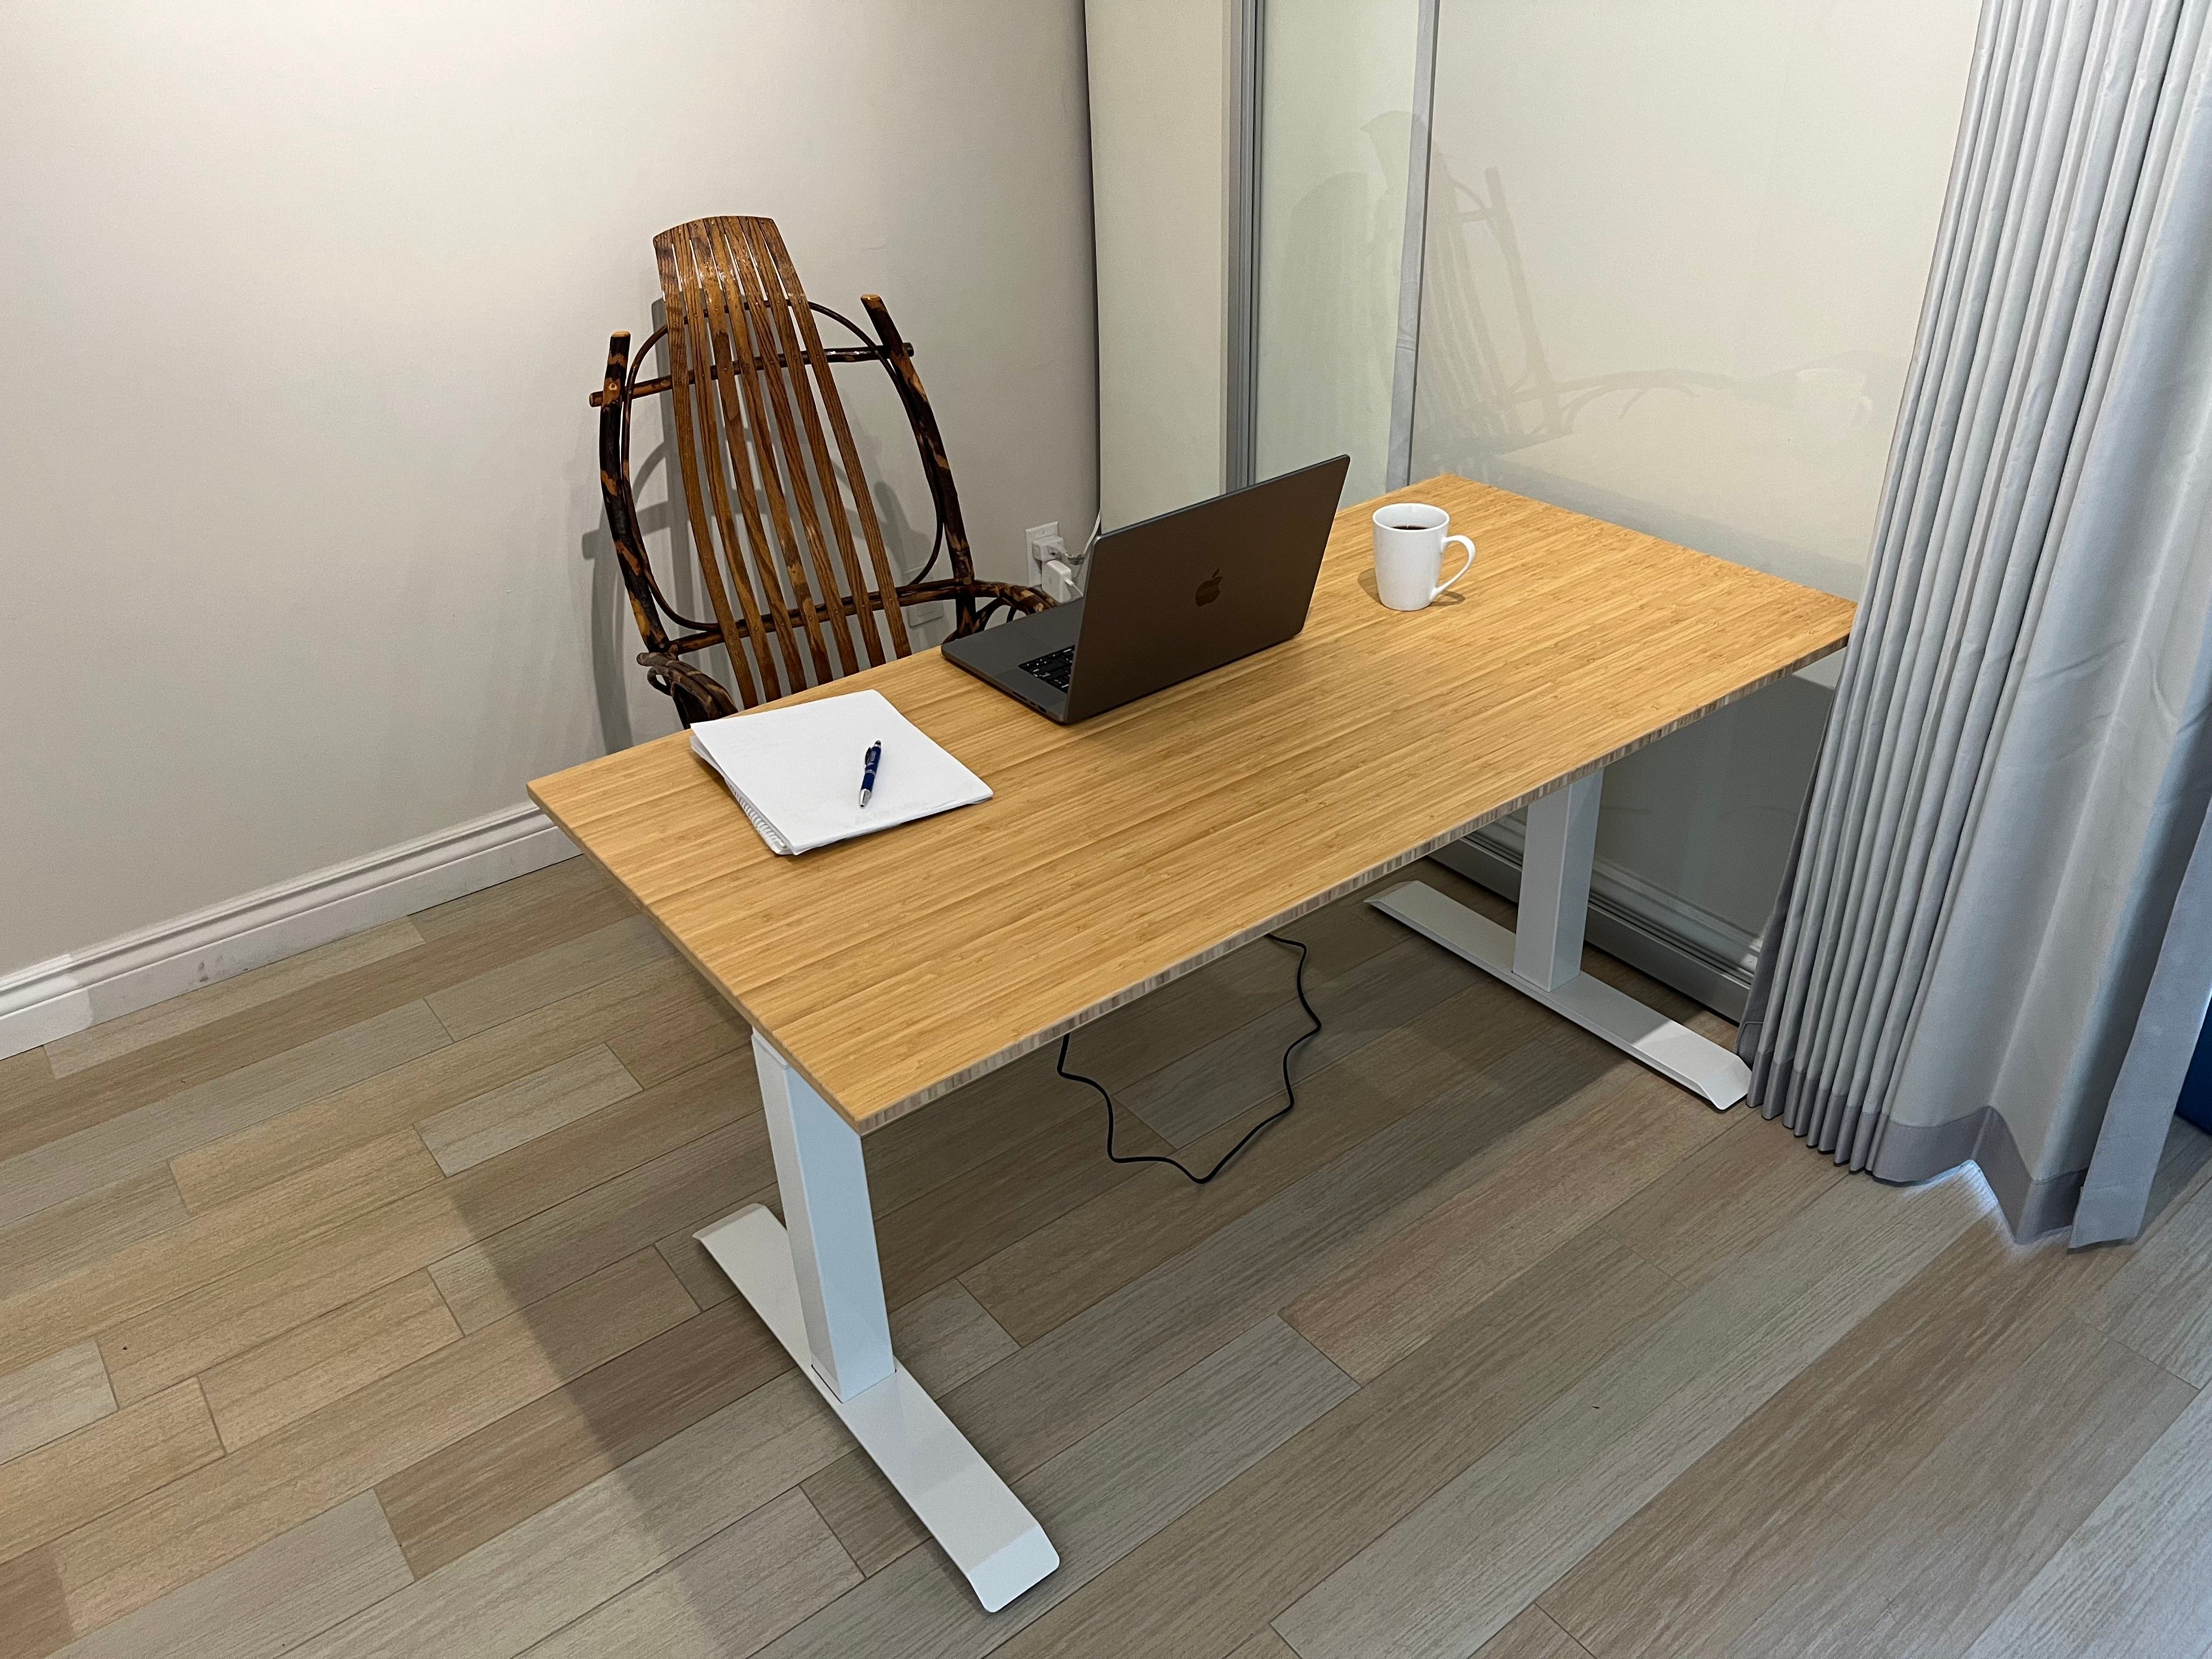 Flexispot E7 Standing Desk Review: How Does It Compare To The IKEA Bekant?